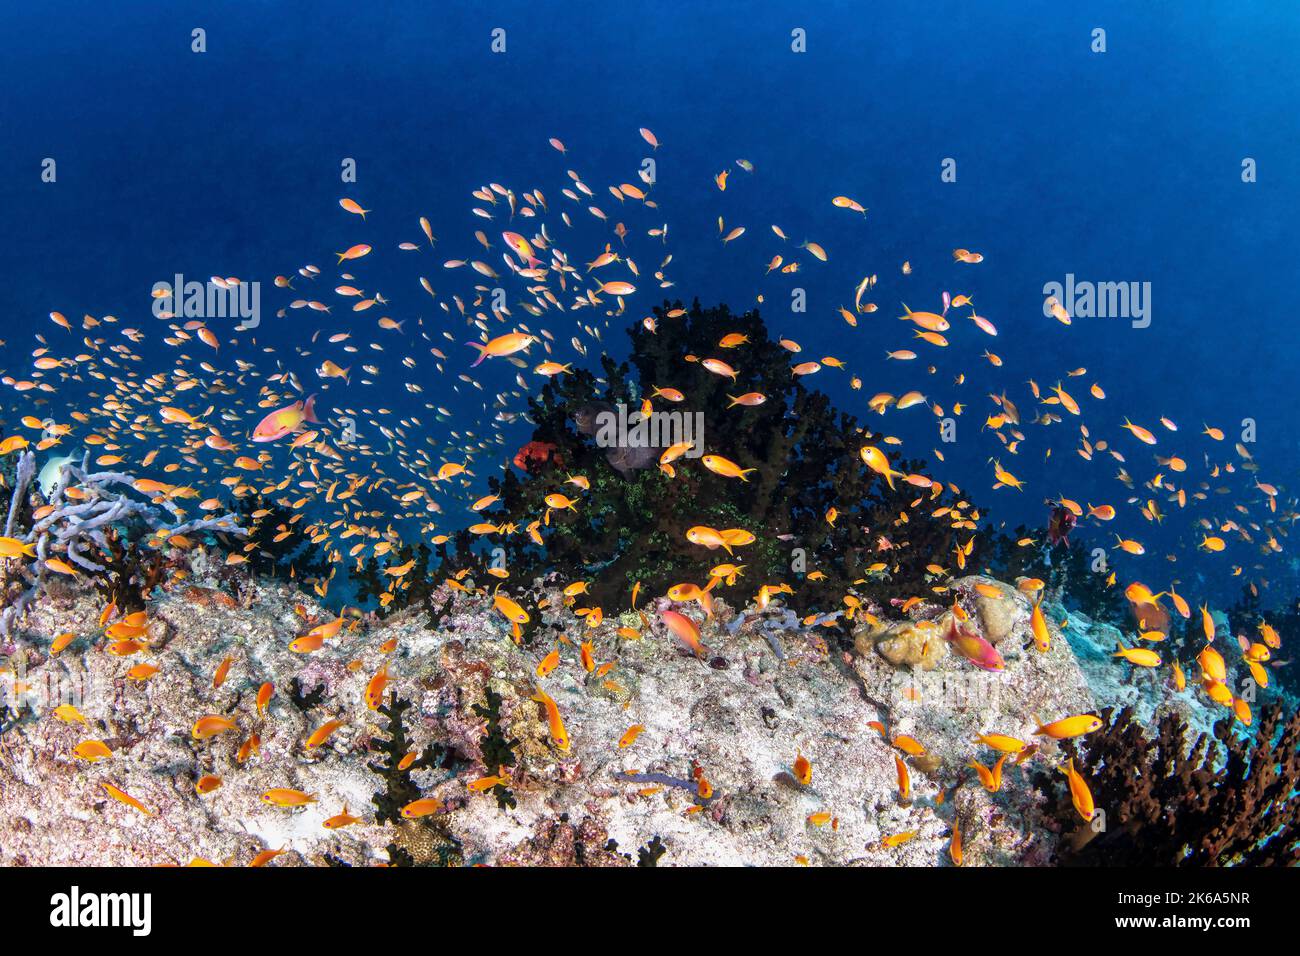 A stiff current brings out the reef fish around a coral reef, Maldives. Stock Photo